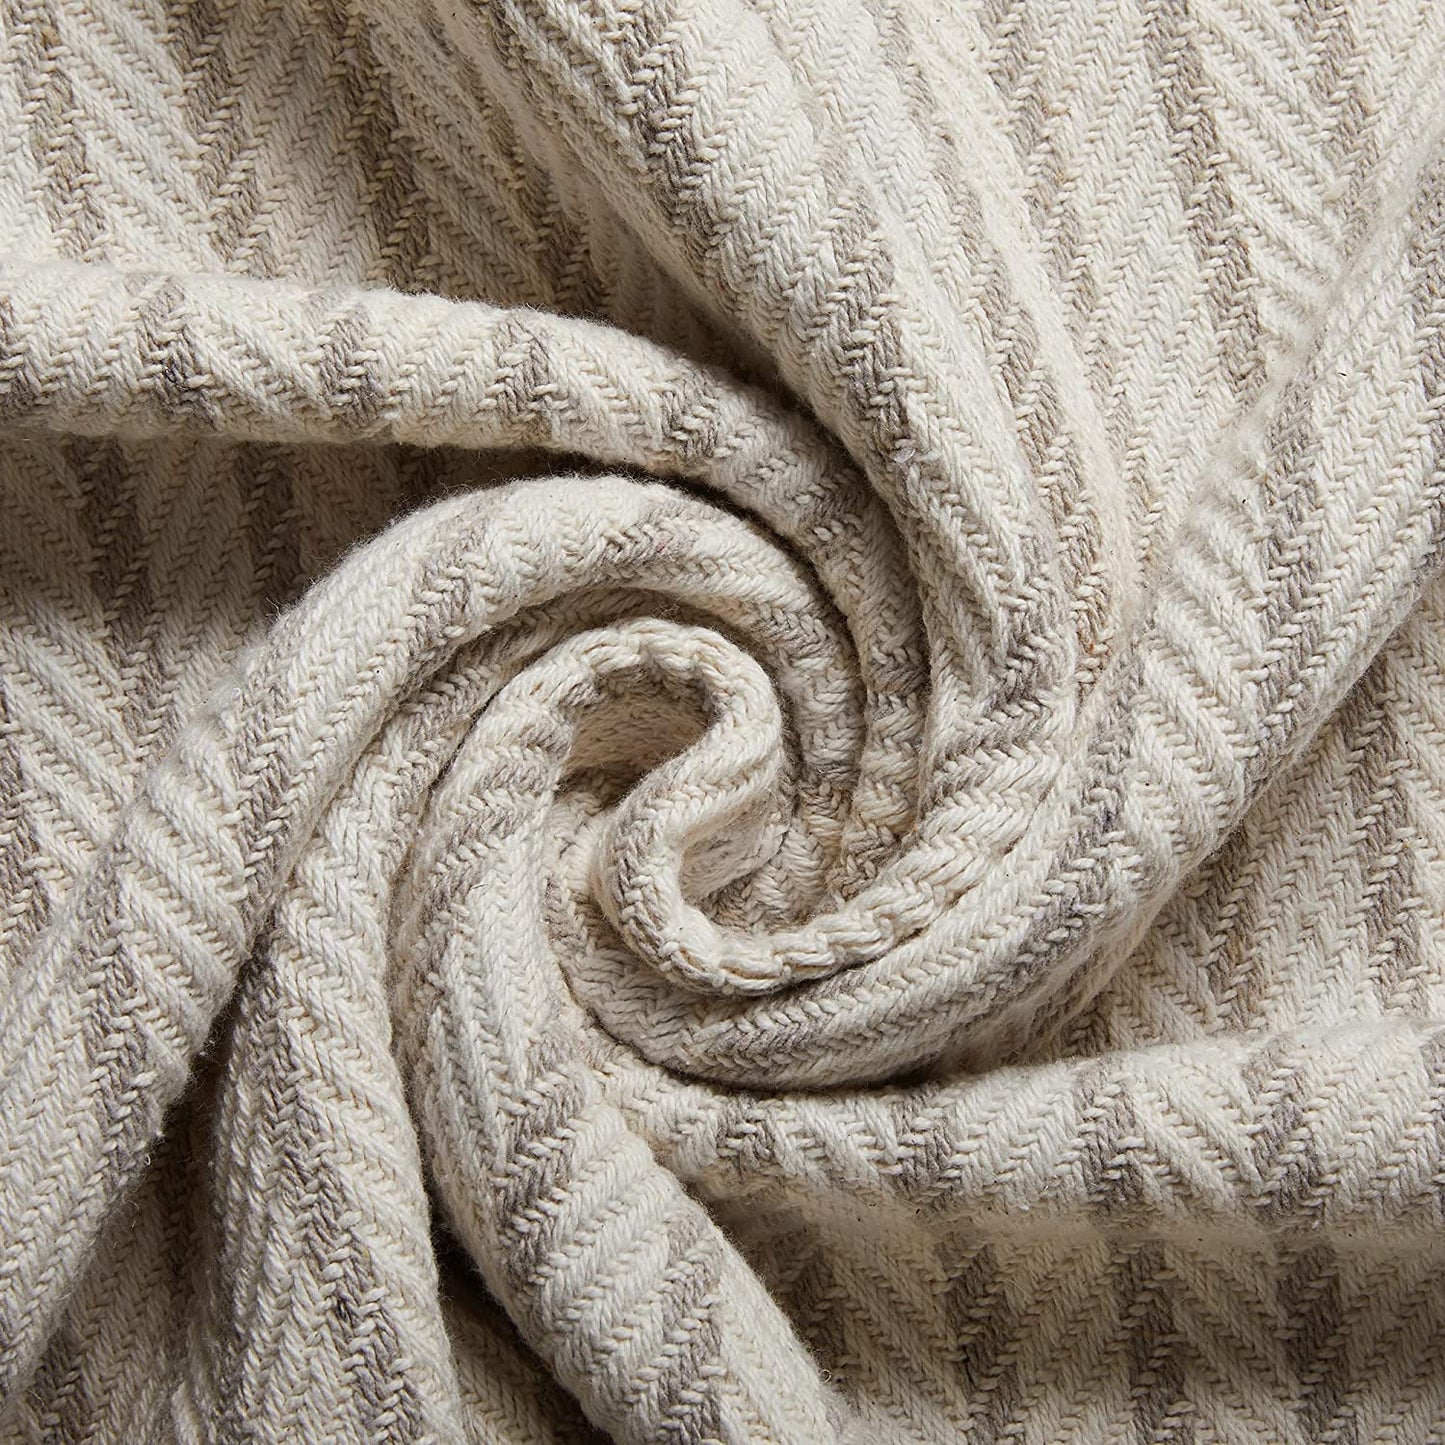 Neutral Lightweight Cozy Soft Blankets & Throws for Bed - Variety of style